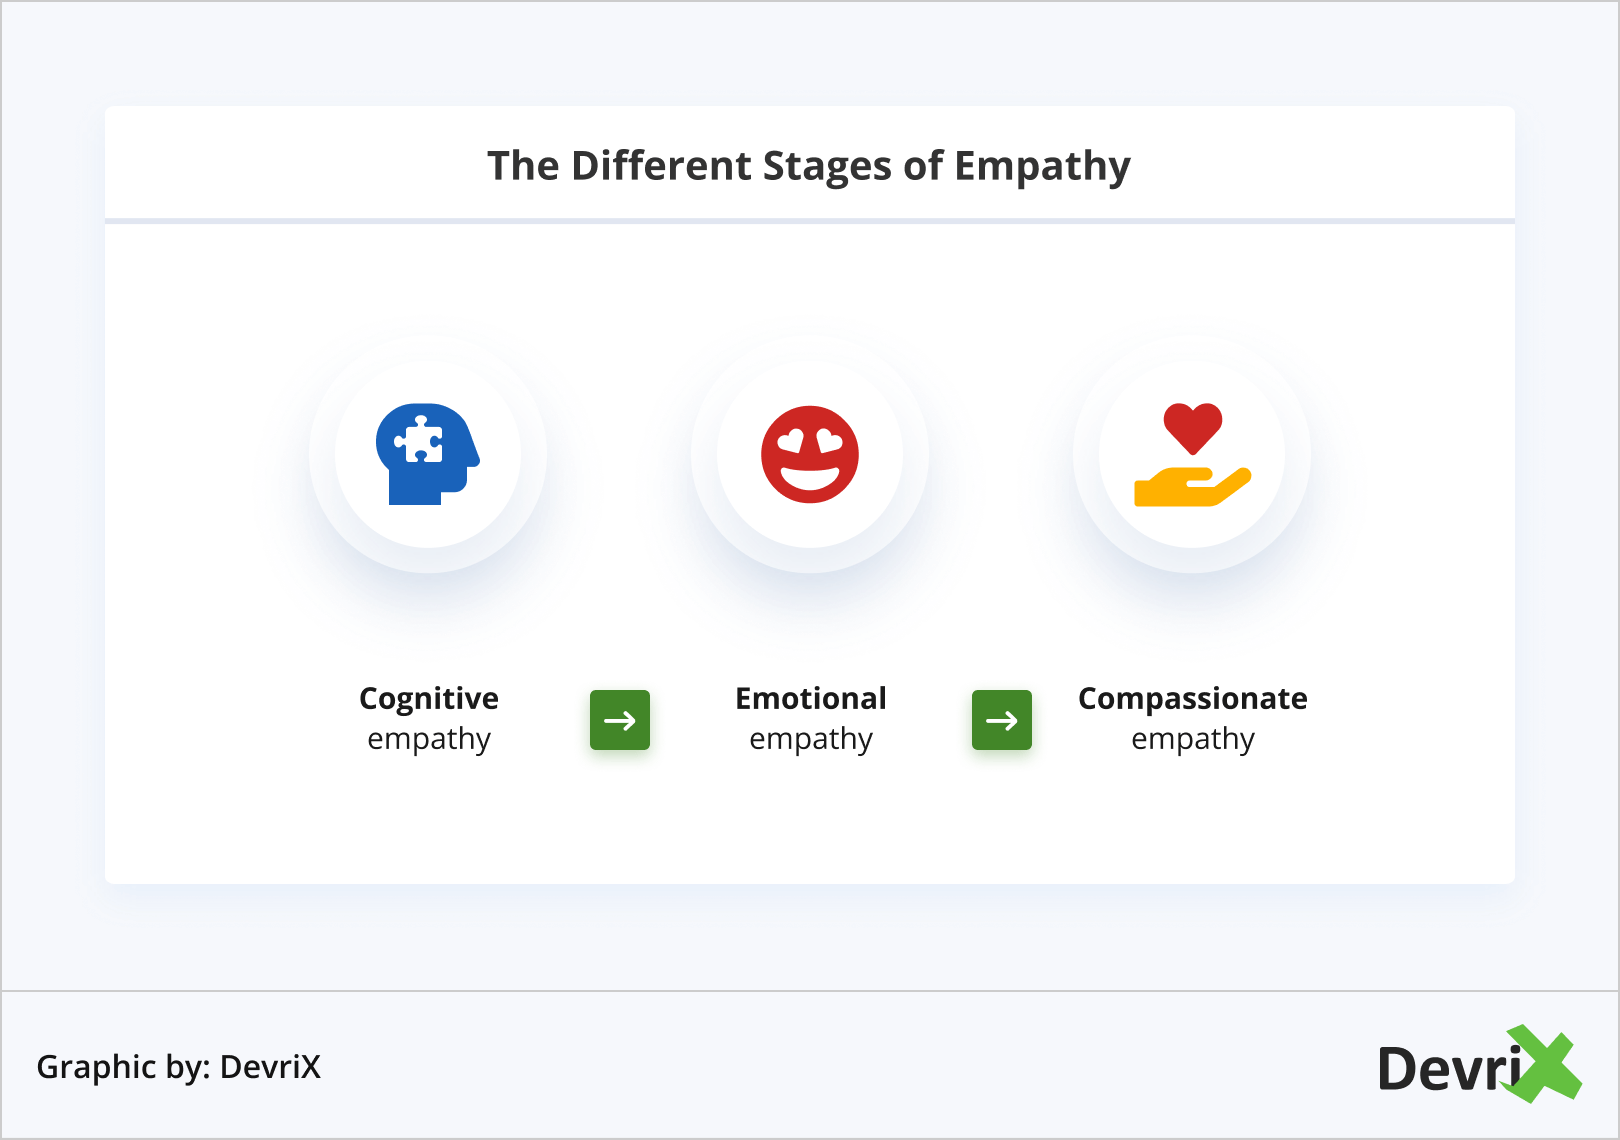 The Different Stages of Empathy